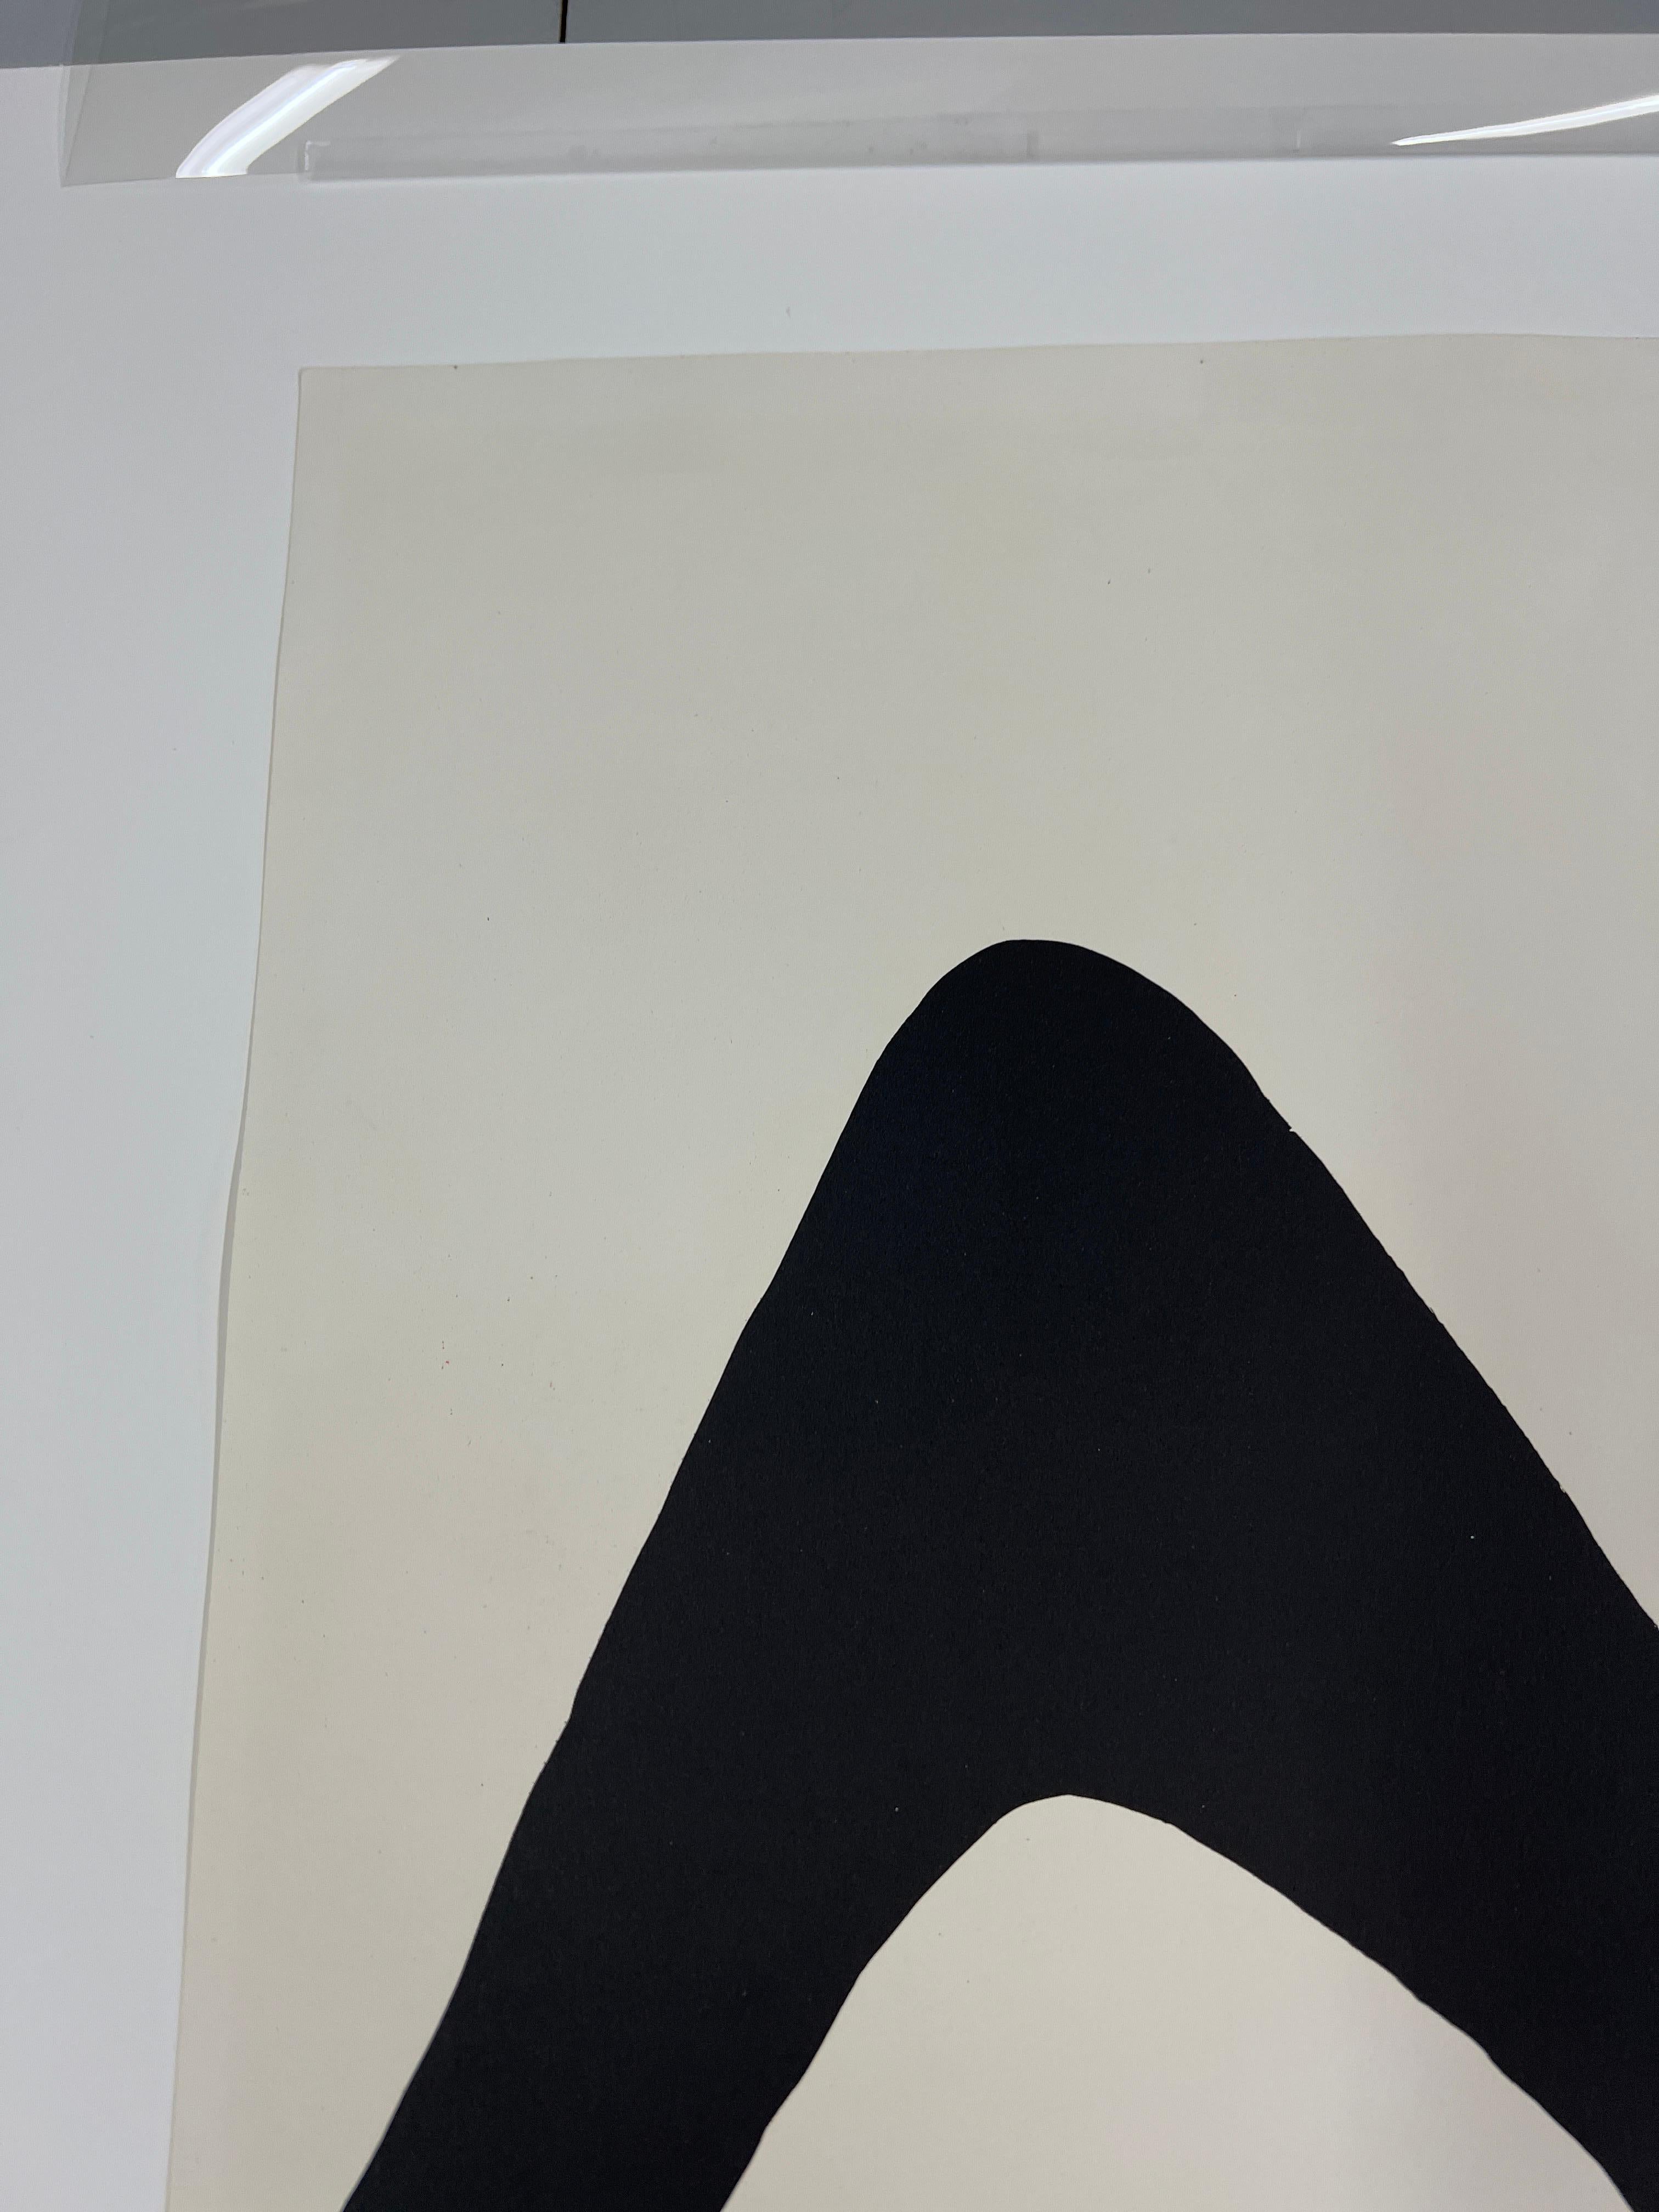 A very good impression of this color lithograph on wove paper. Signed and numbered 37/150 in pencil by Calder. Printed and published by Maeght, Paris. 